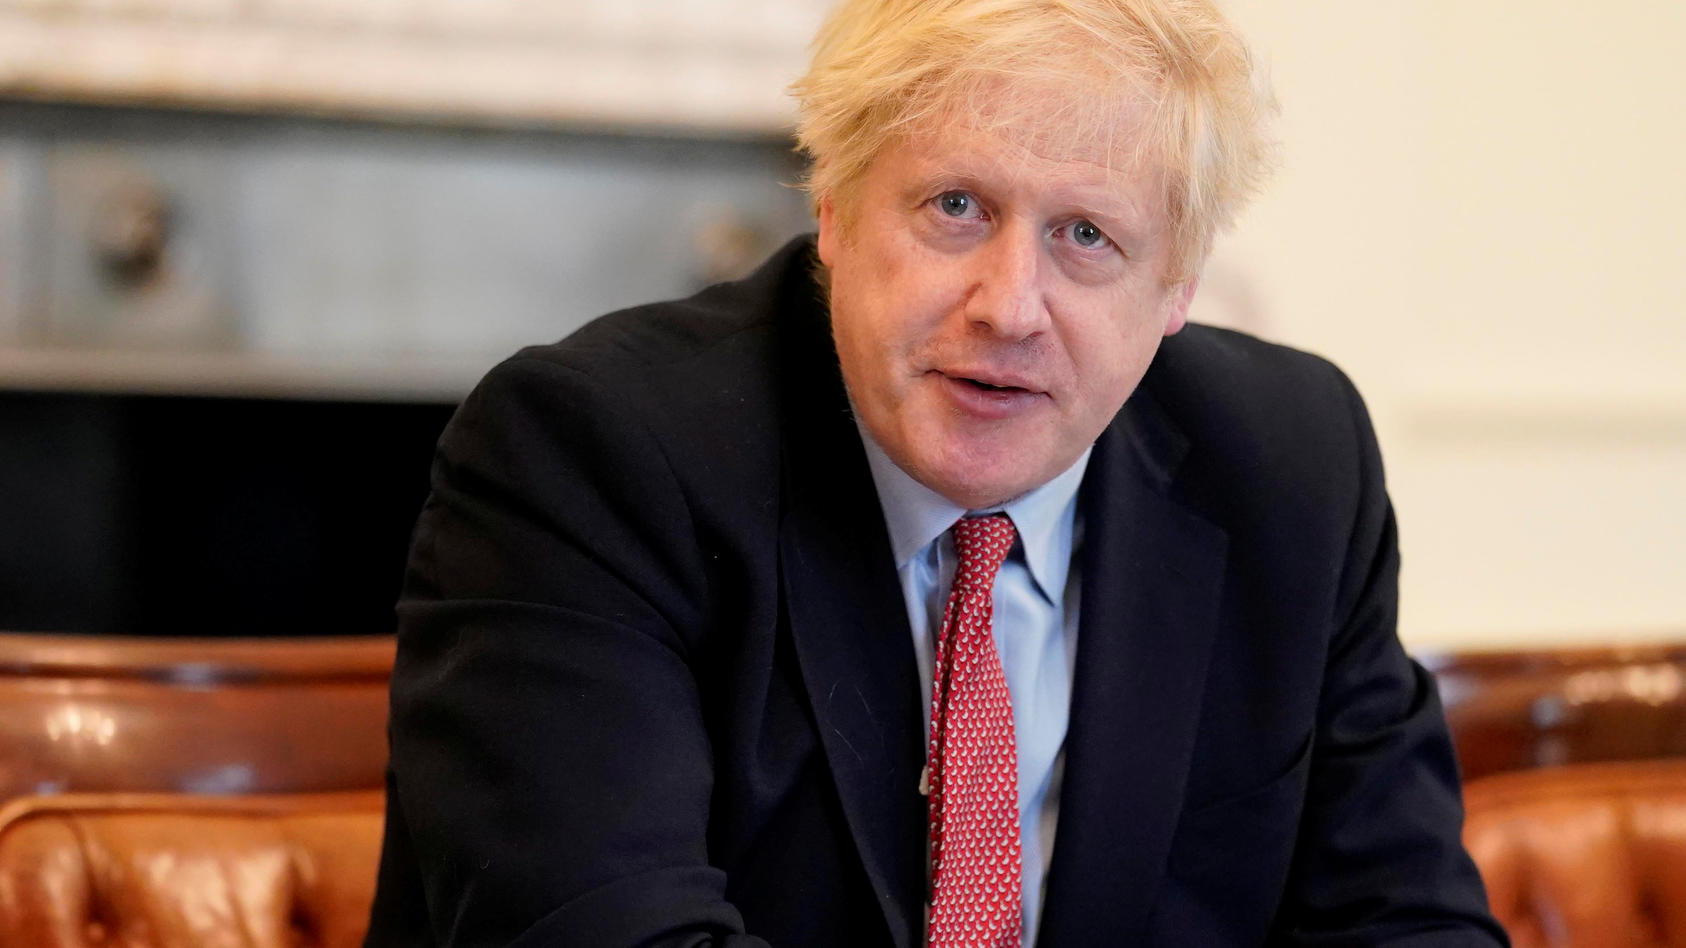 Britain's Prime Minister Boris Johnson chairs a meeting to update on the coronavirus disease (COVID-19) outbreak, in the cabinet room of the 10 Downing Street in London, Britain April 27, 2020. Andrew Parsons/10 Downing Street/Handout via REUTERS THI